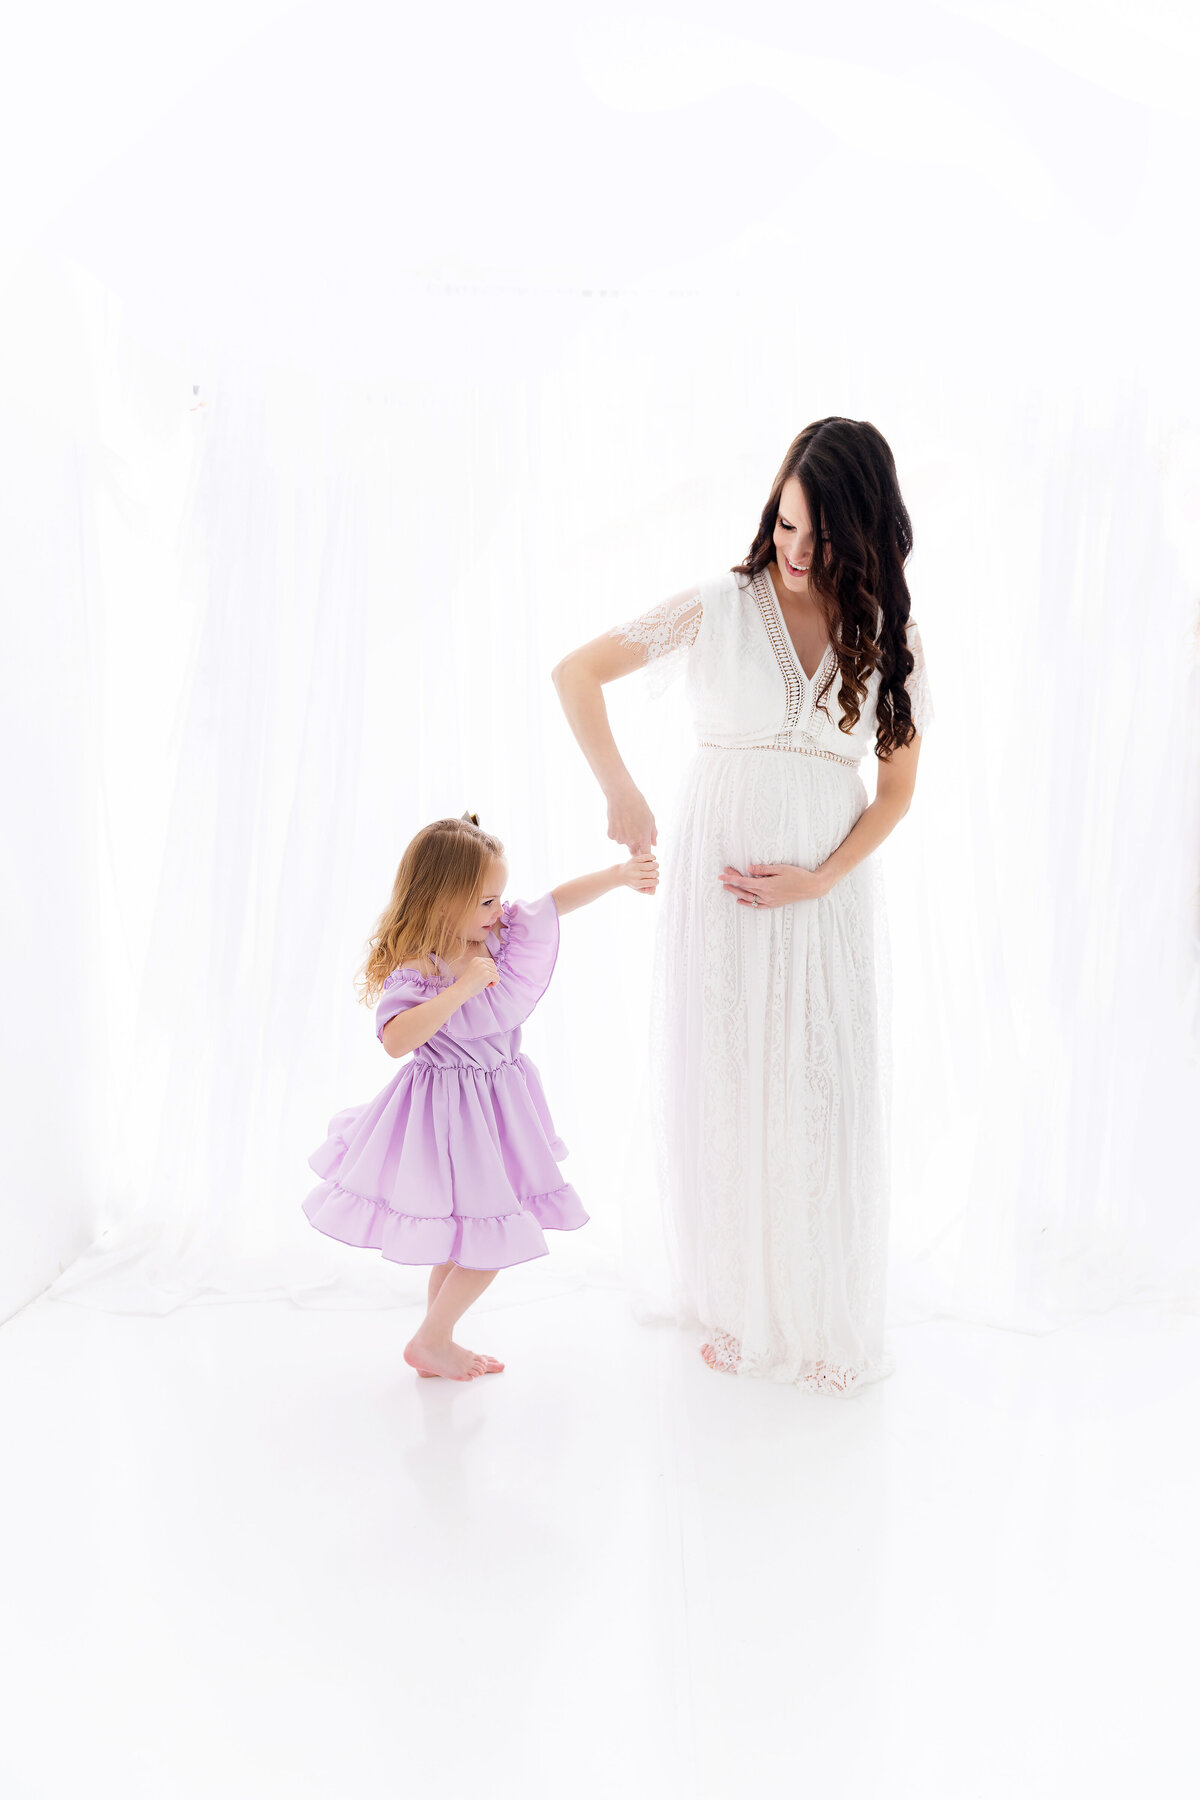 A pregnant mom spins her daughter around in a white gown for maternity photos